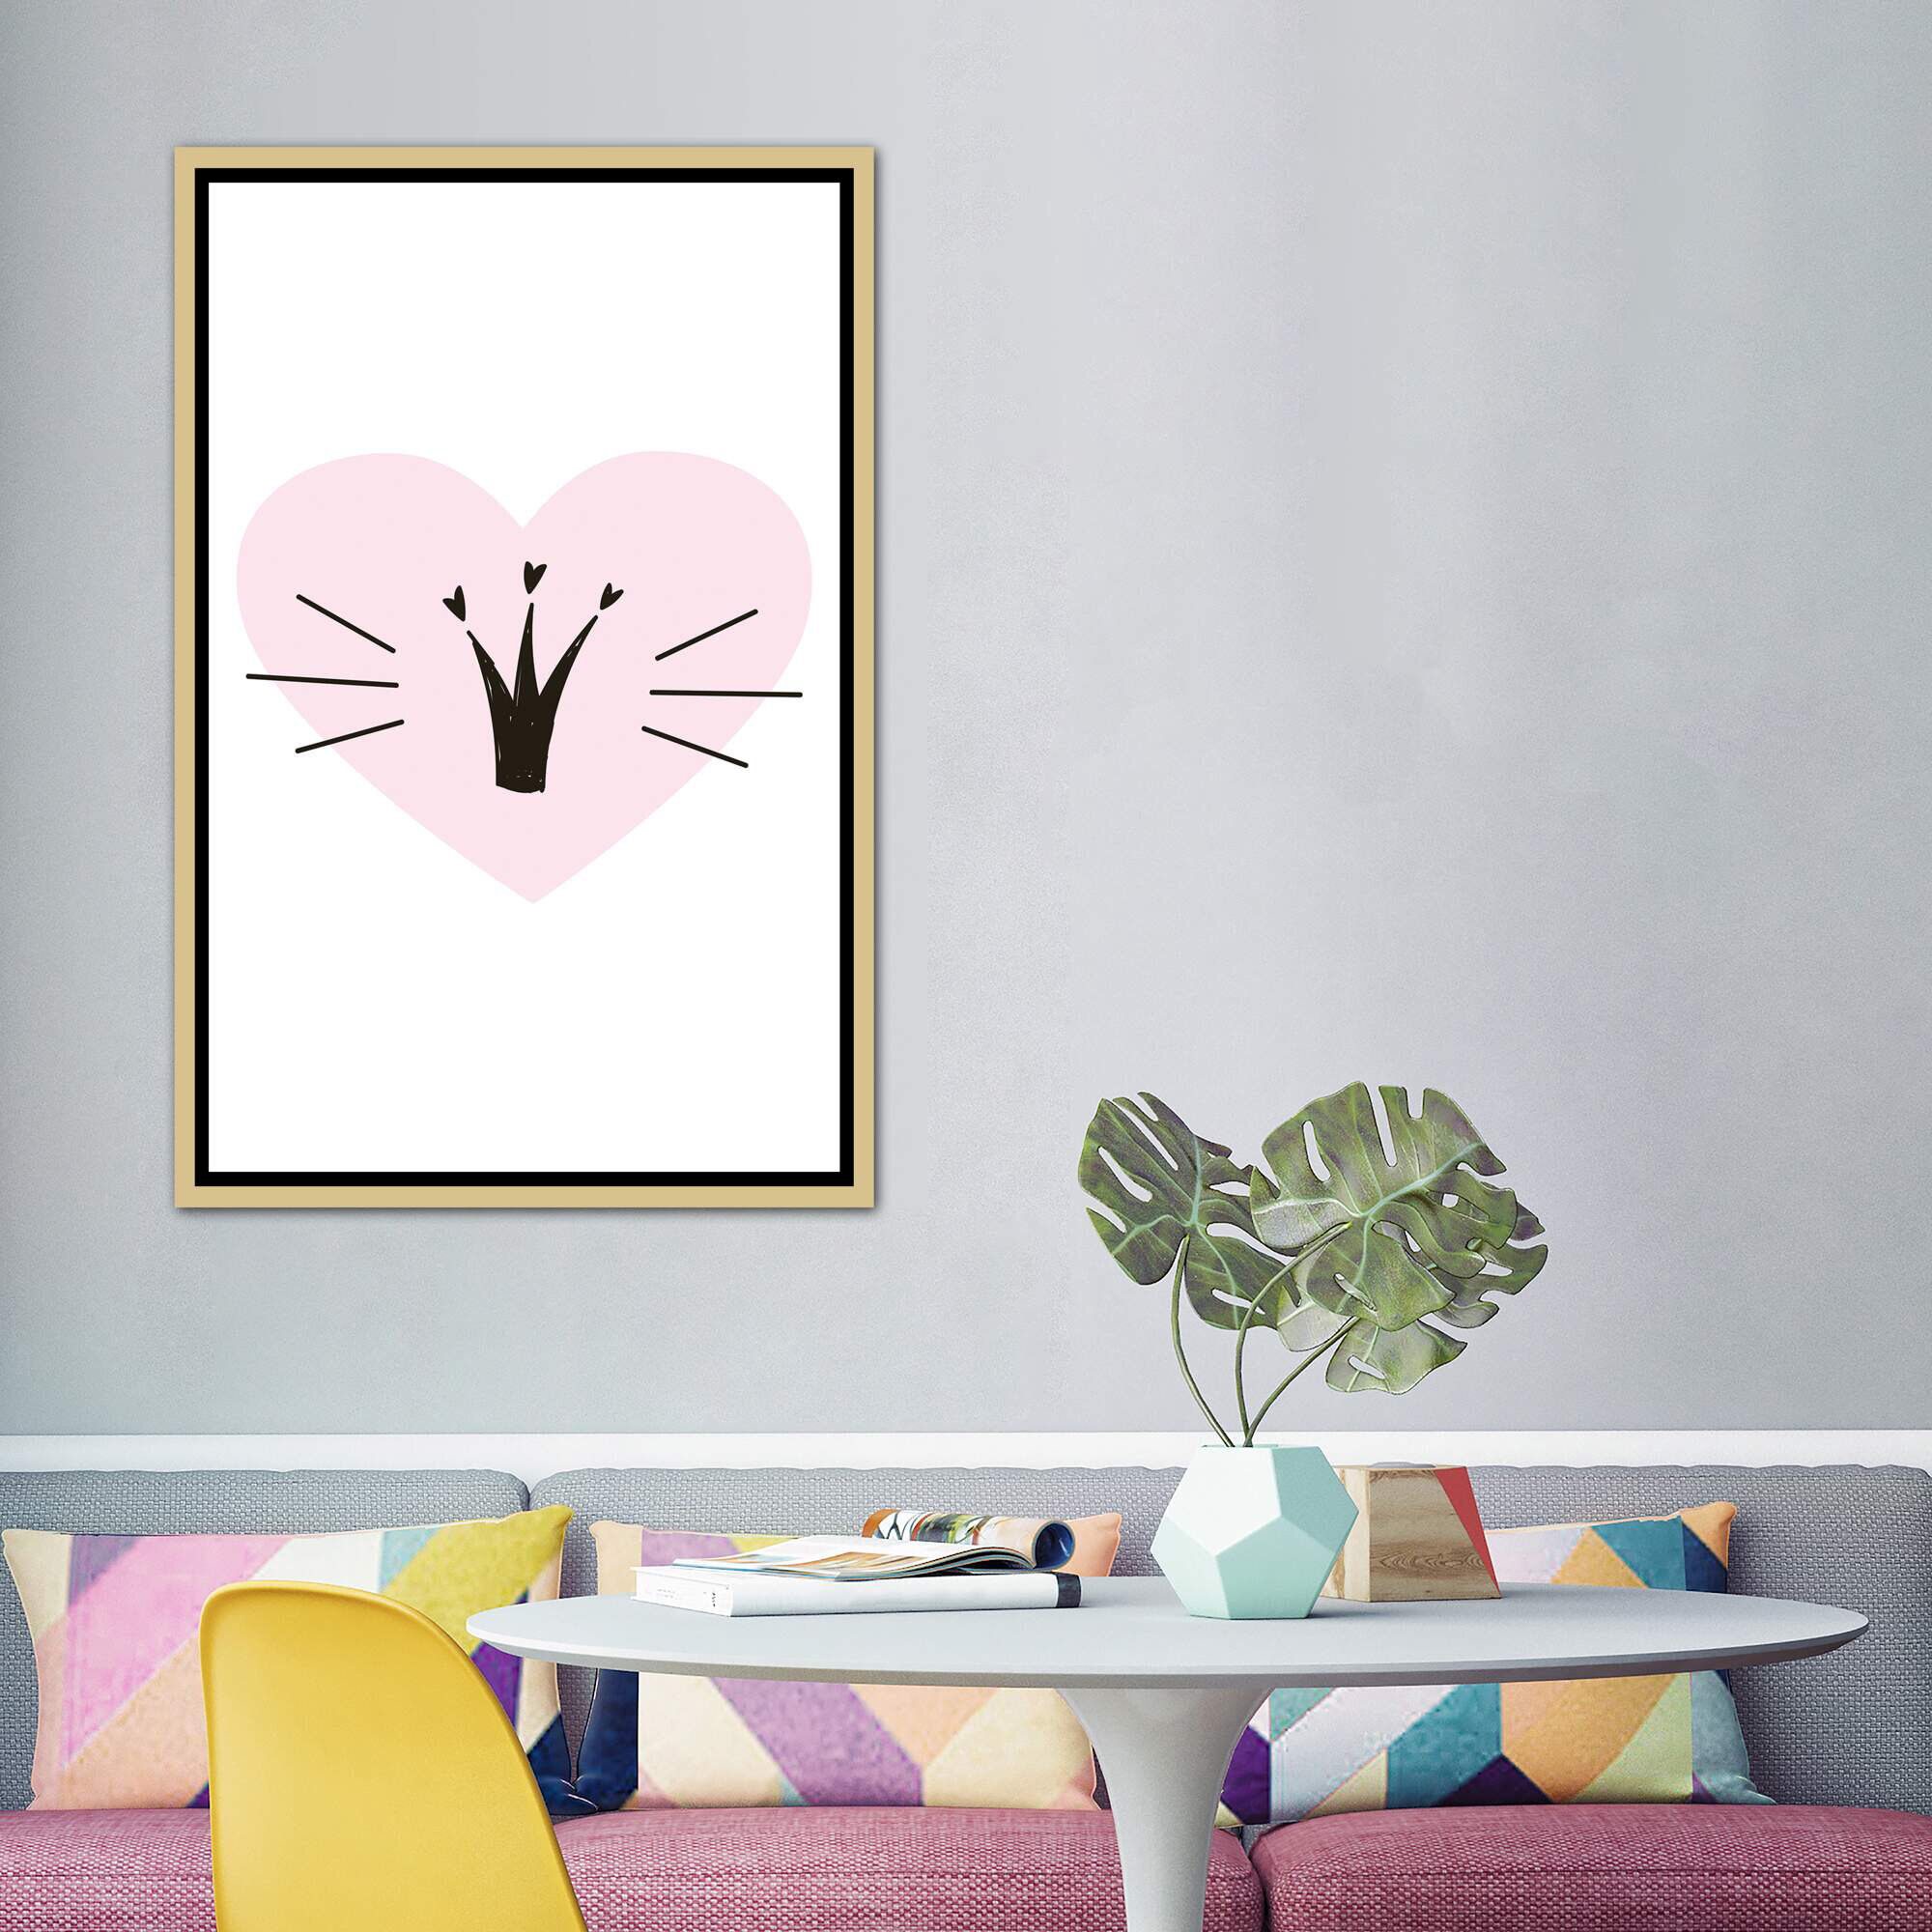 Ebern Designs Pieces Of My Heart On Canvas by Sydney Edmunds